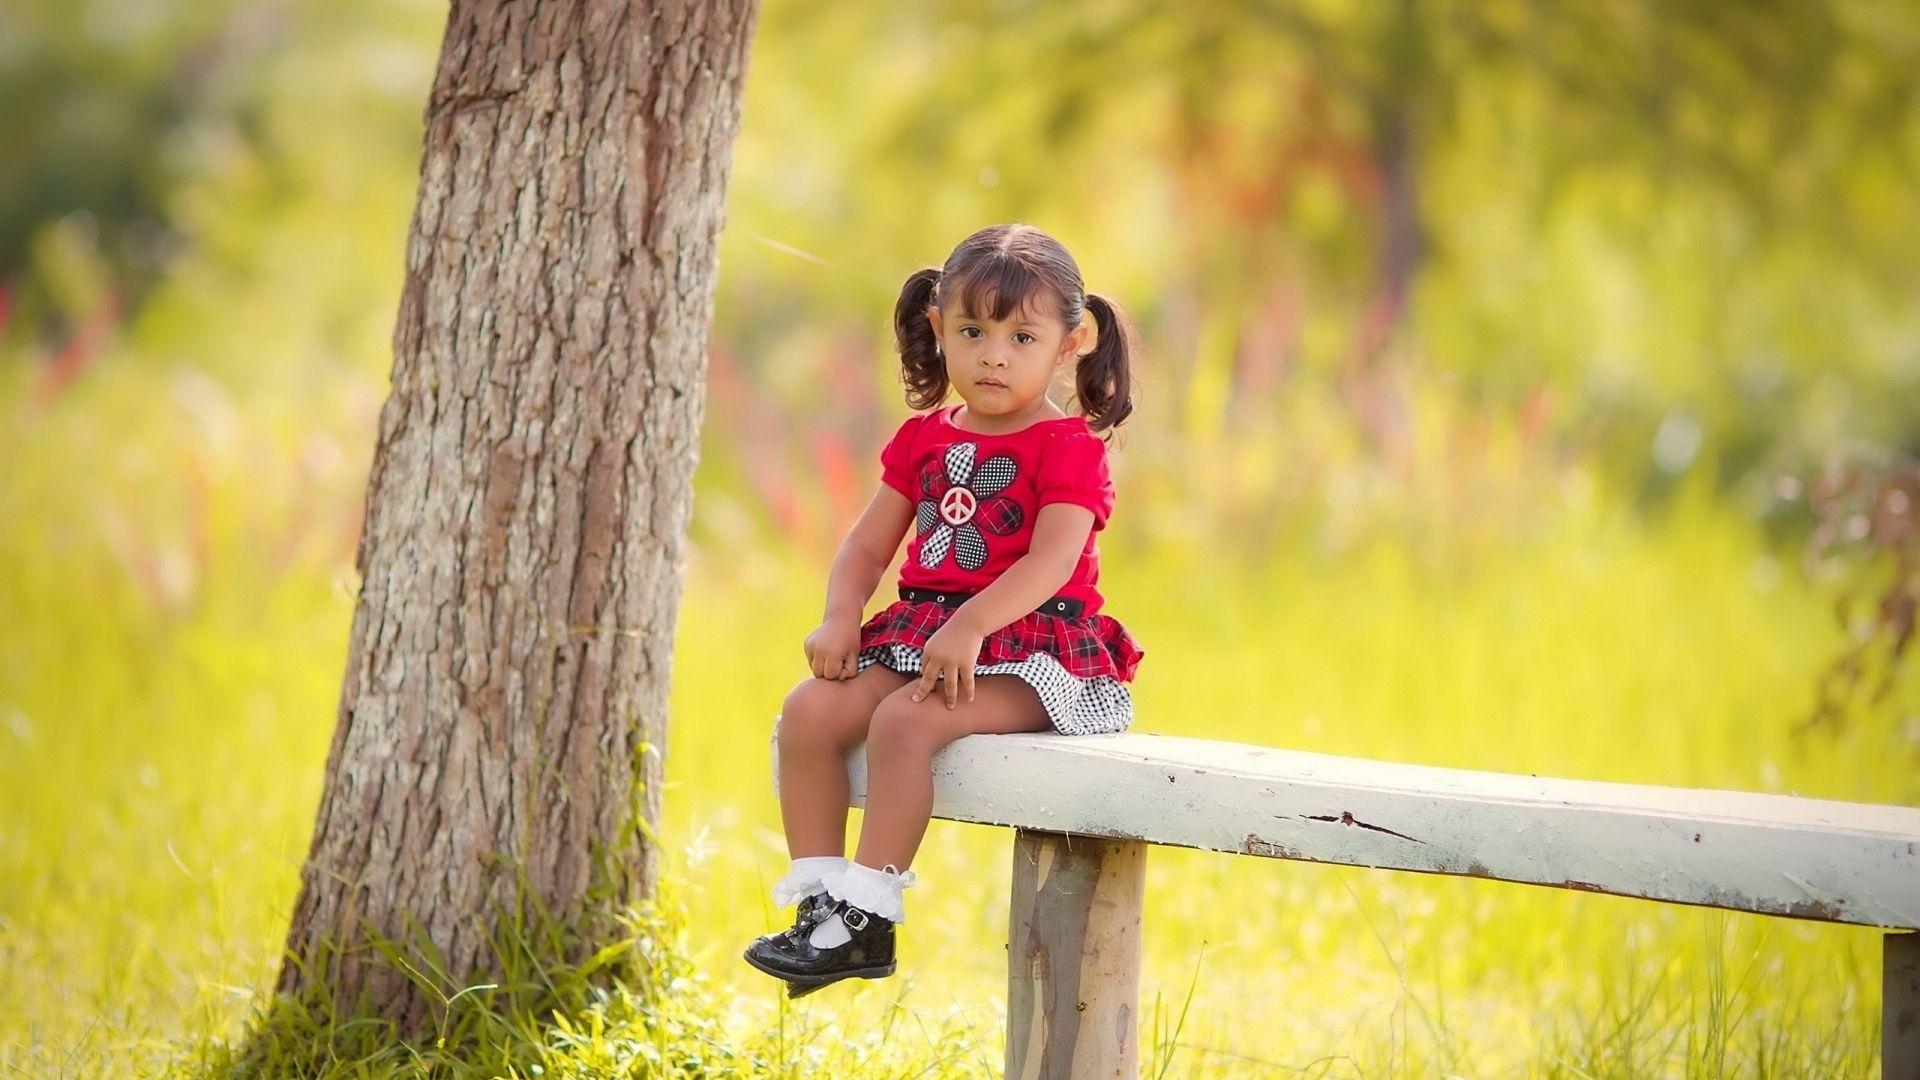 Free download Sad Little Girl Sitting On Bench Wallpapers.